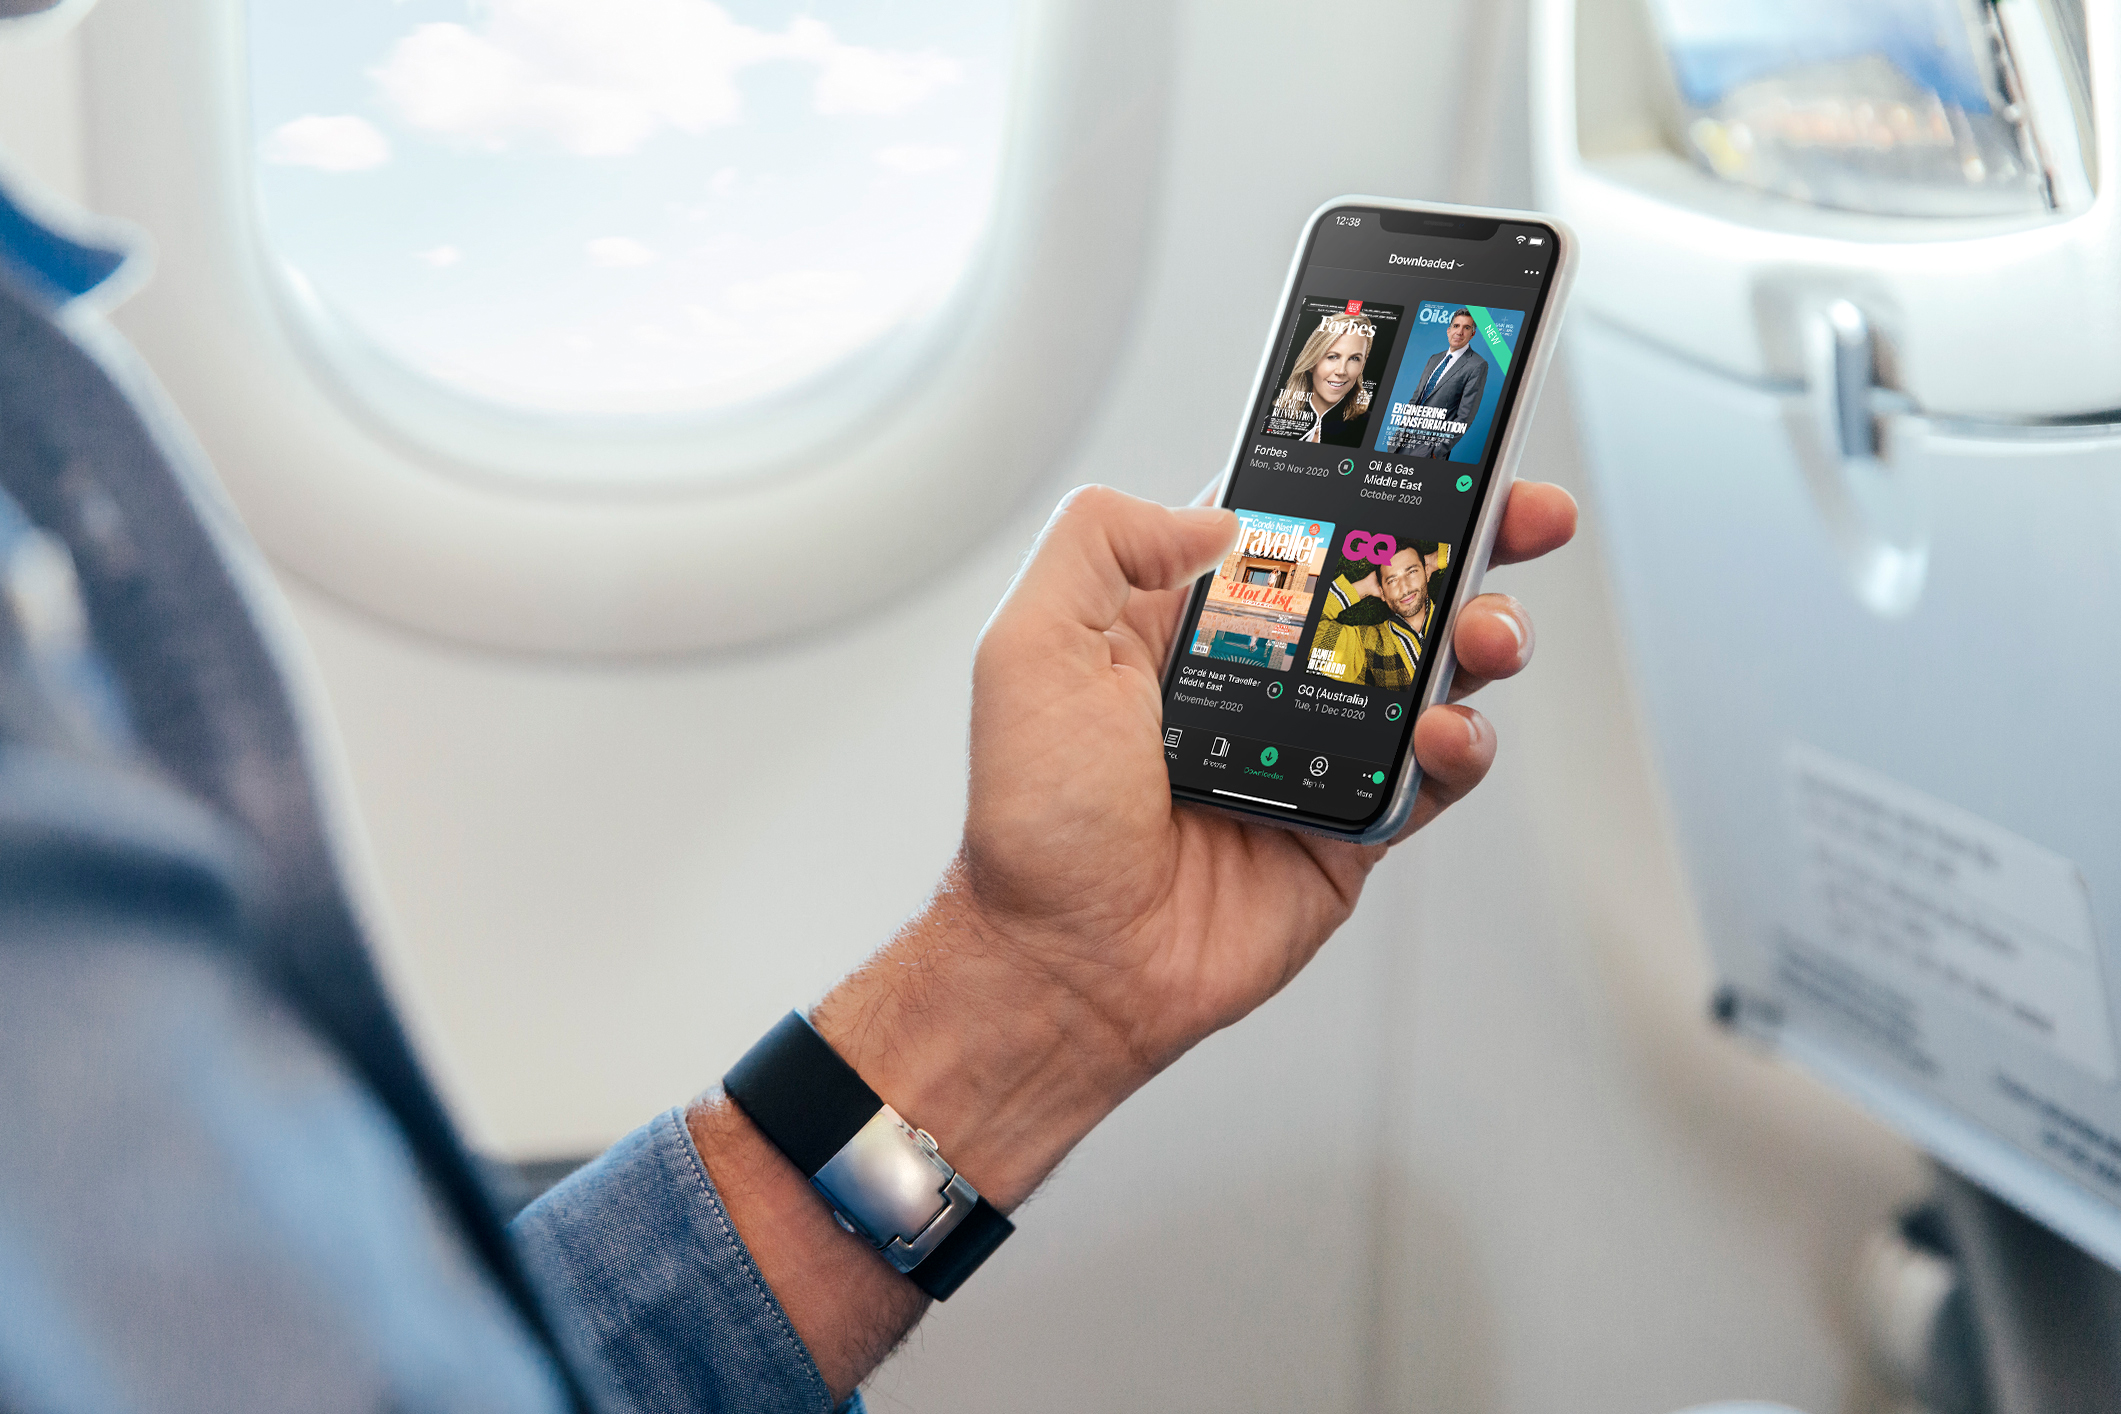 Etihad Airways Partners With Pressreader Giving Guests Access To Free Digital Publications